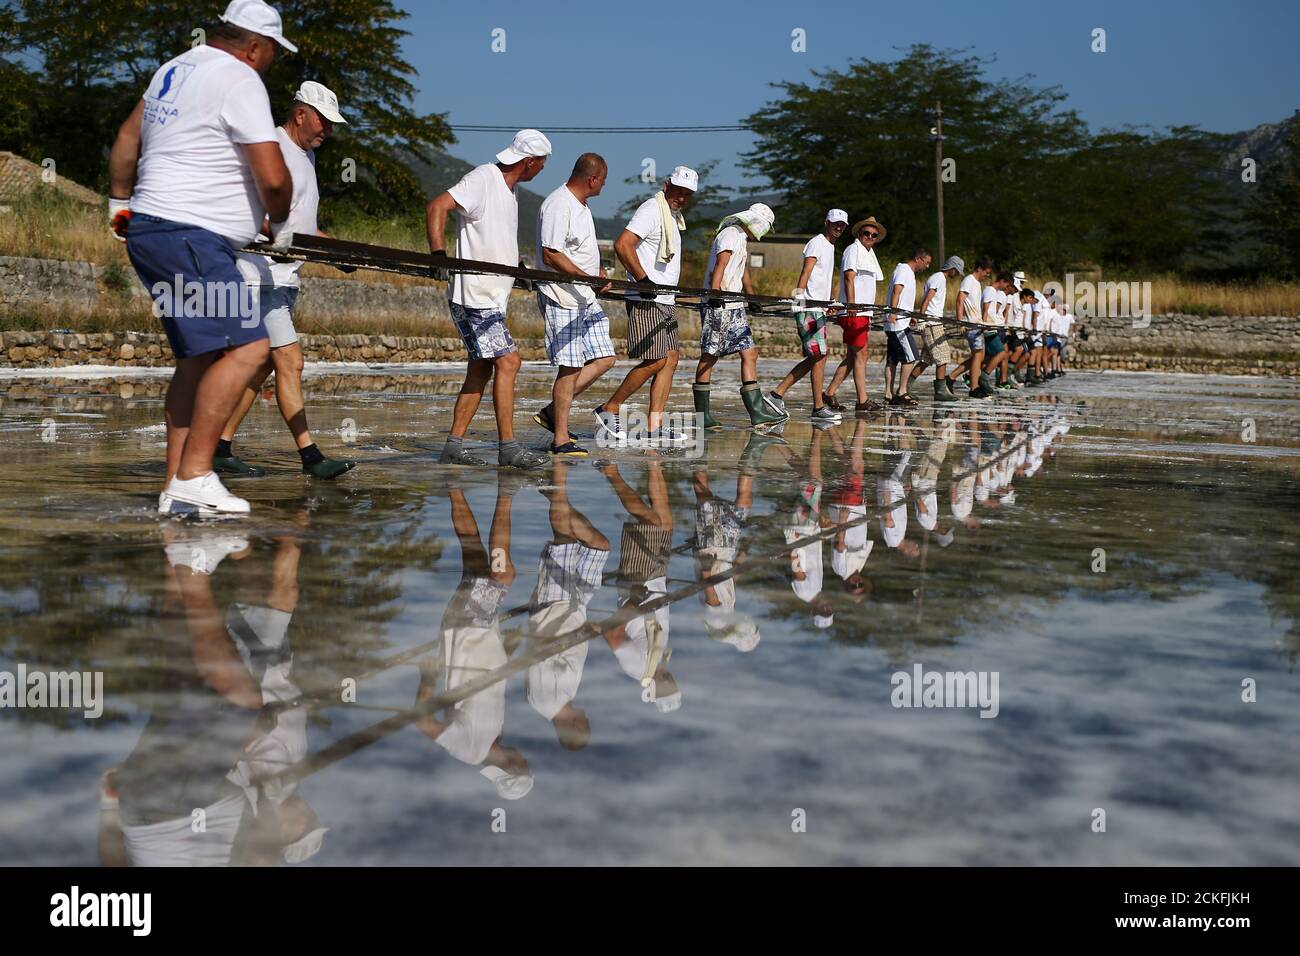 A workers carry railways for wagons at the Ston Saltworks site in Ston,  Croatia, August 8,